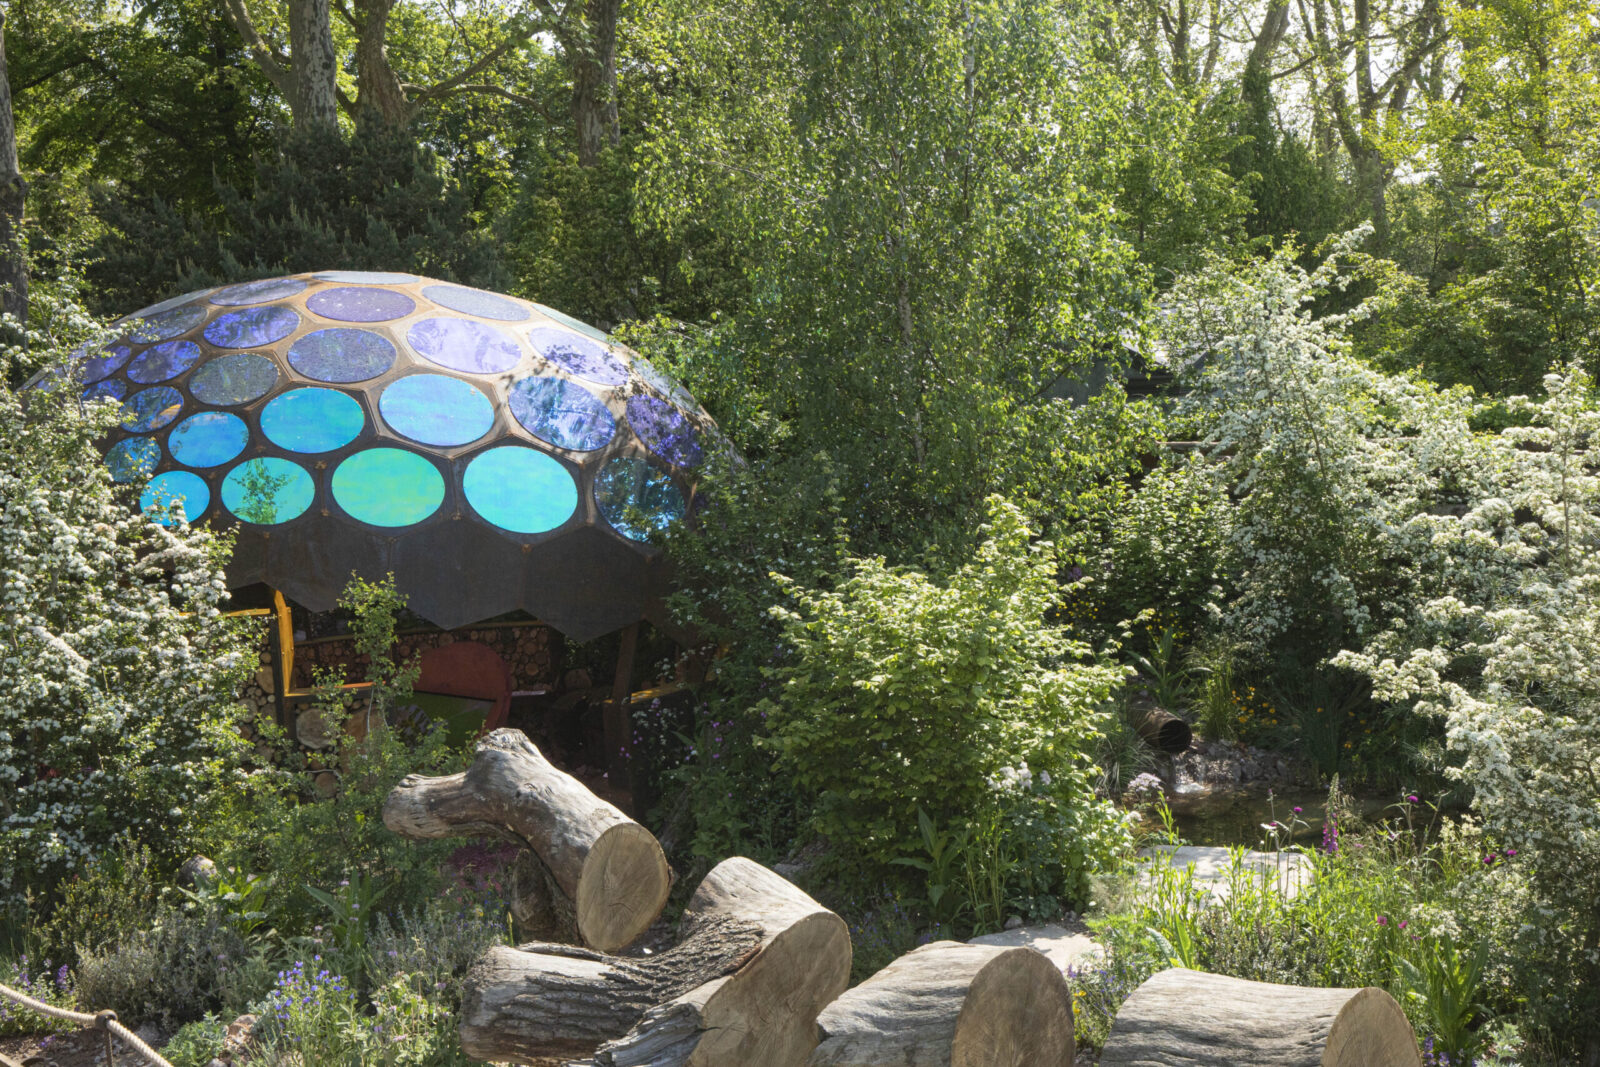 The Insect Garden at Stratford Cross is a haven for insects to live, eat and thrive.